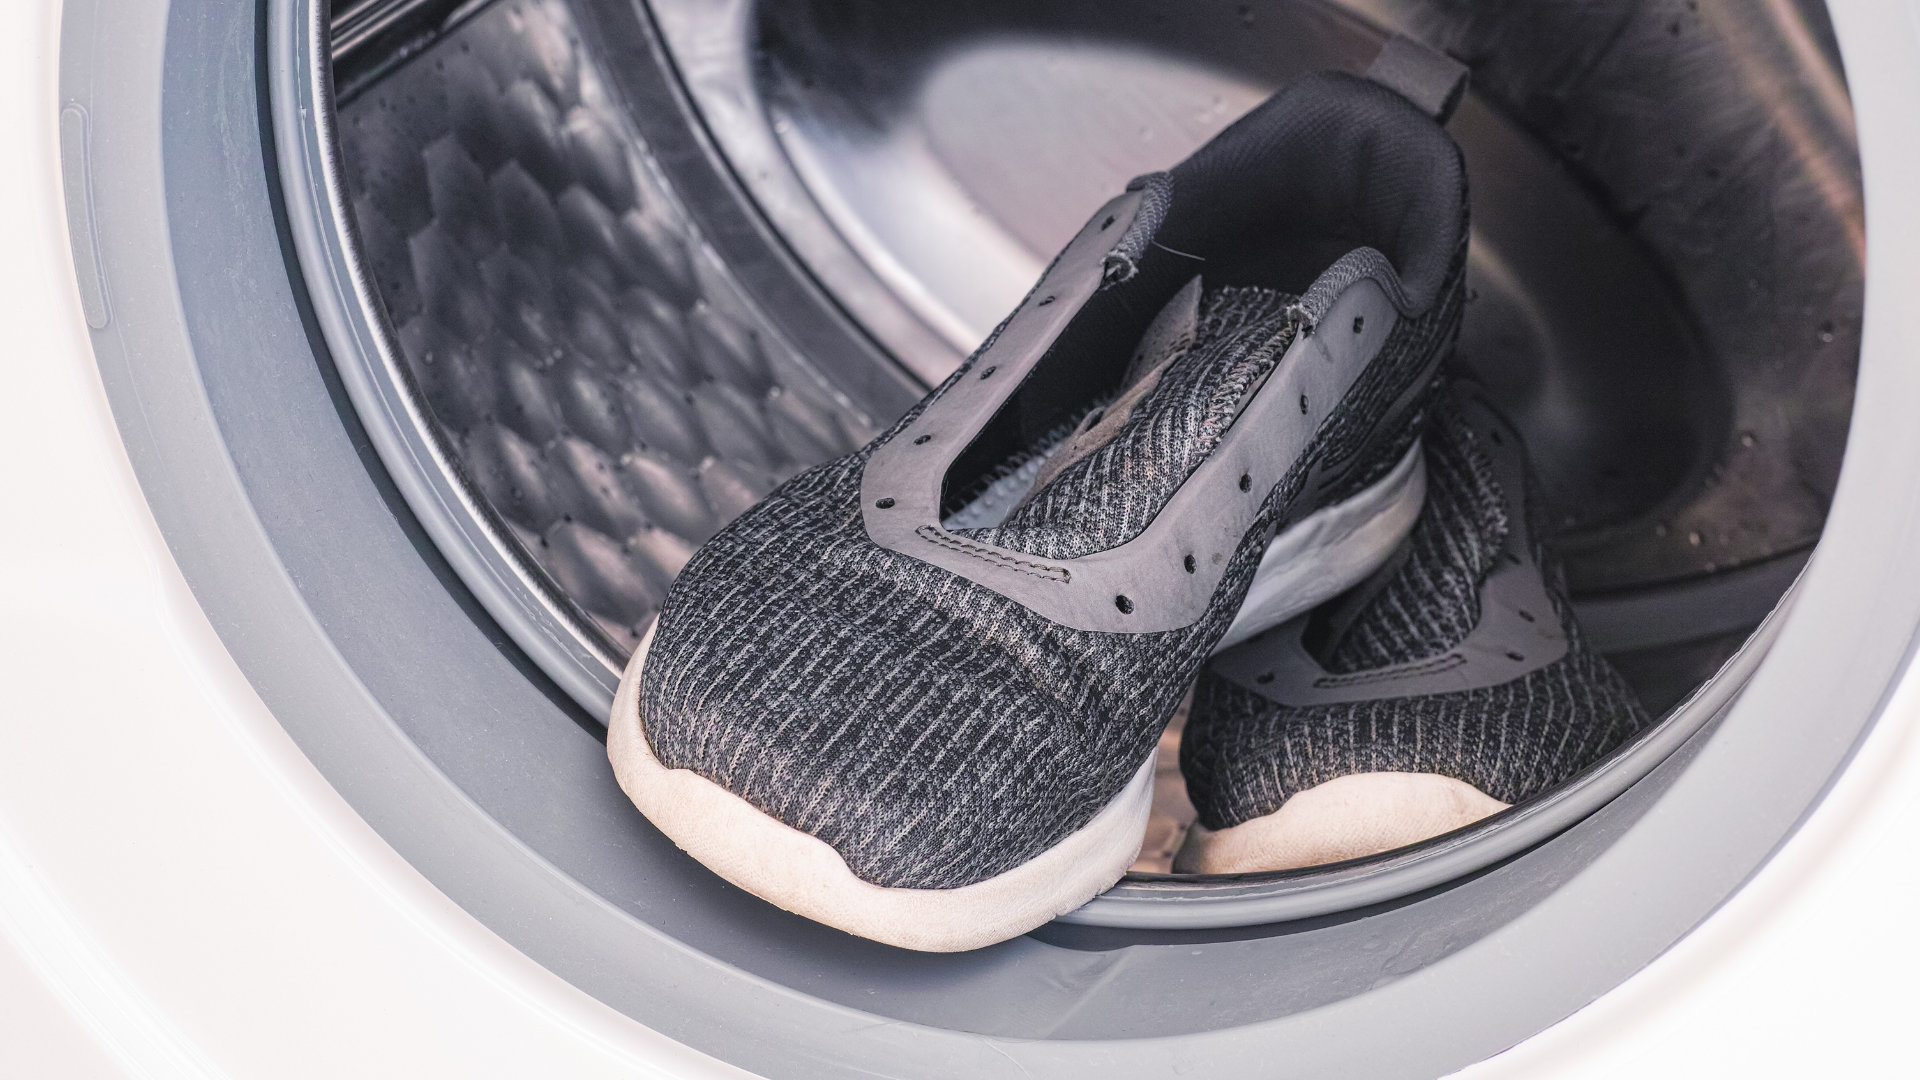 Featured image for “How To Clean Shoes In The Washing Machine”